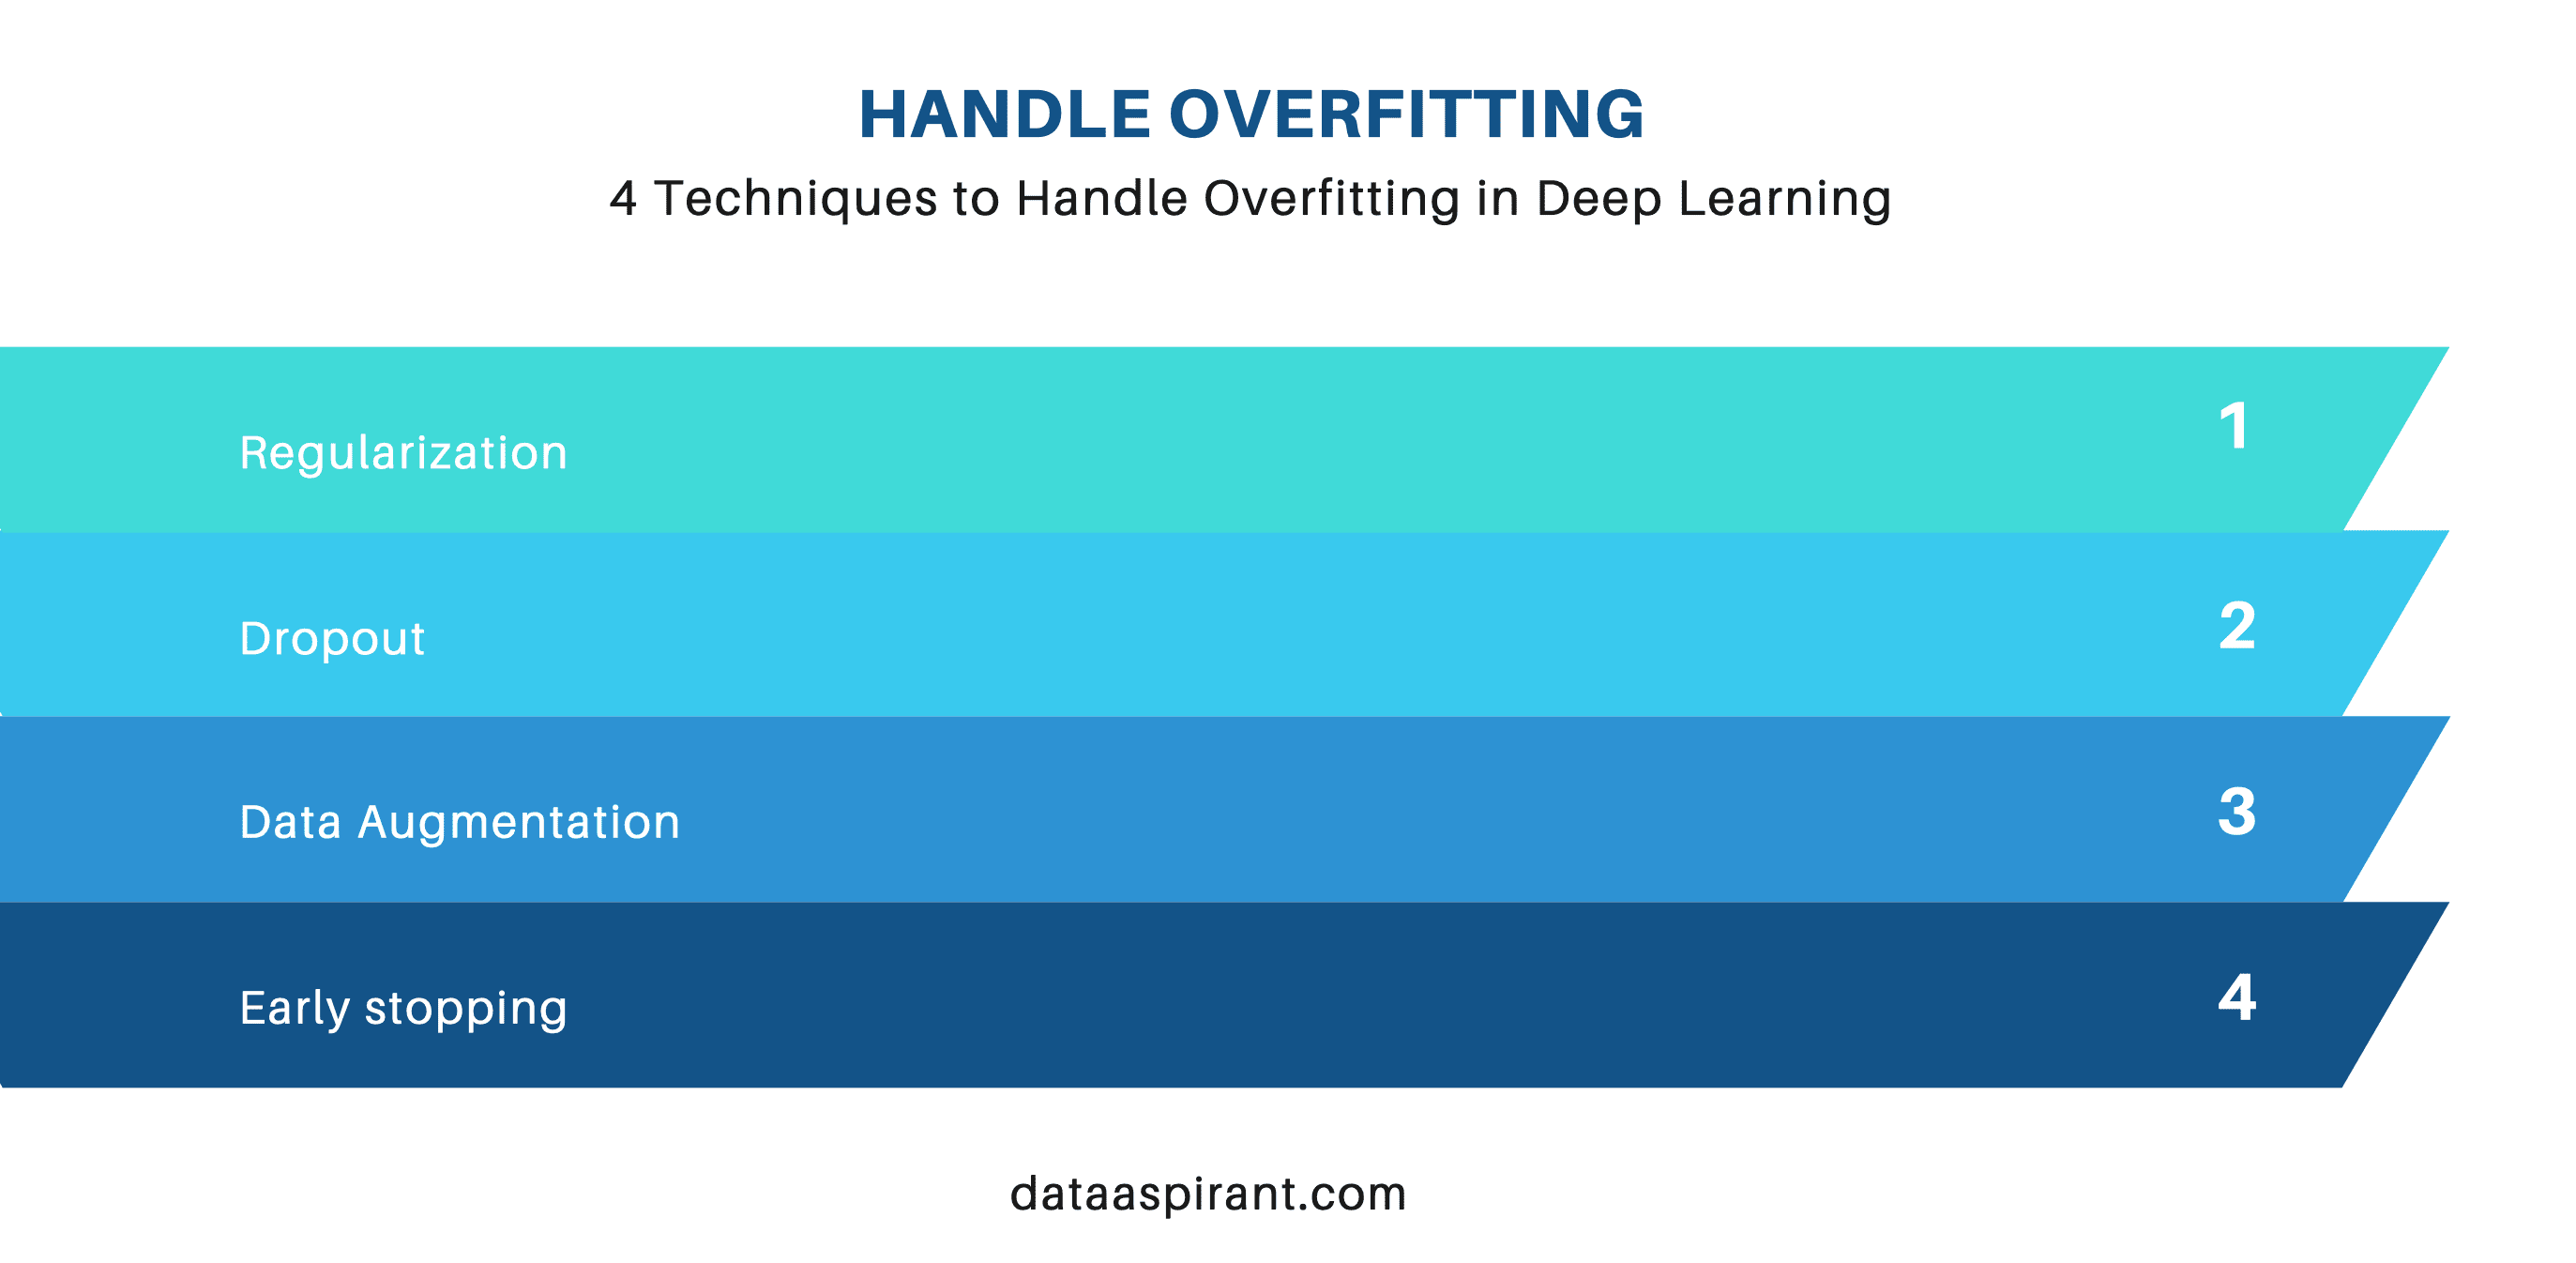 Techniques to handle overfitting in deep learning